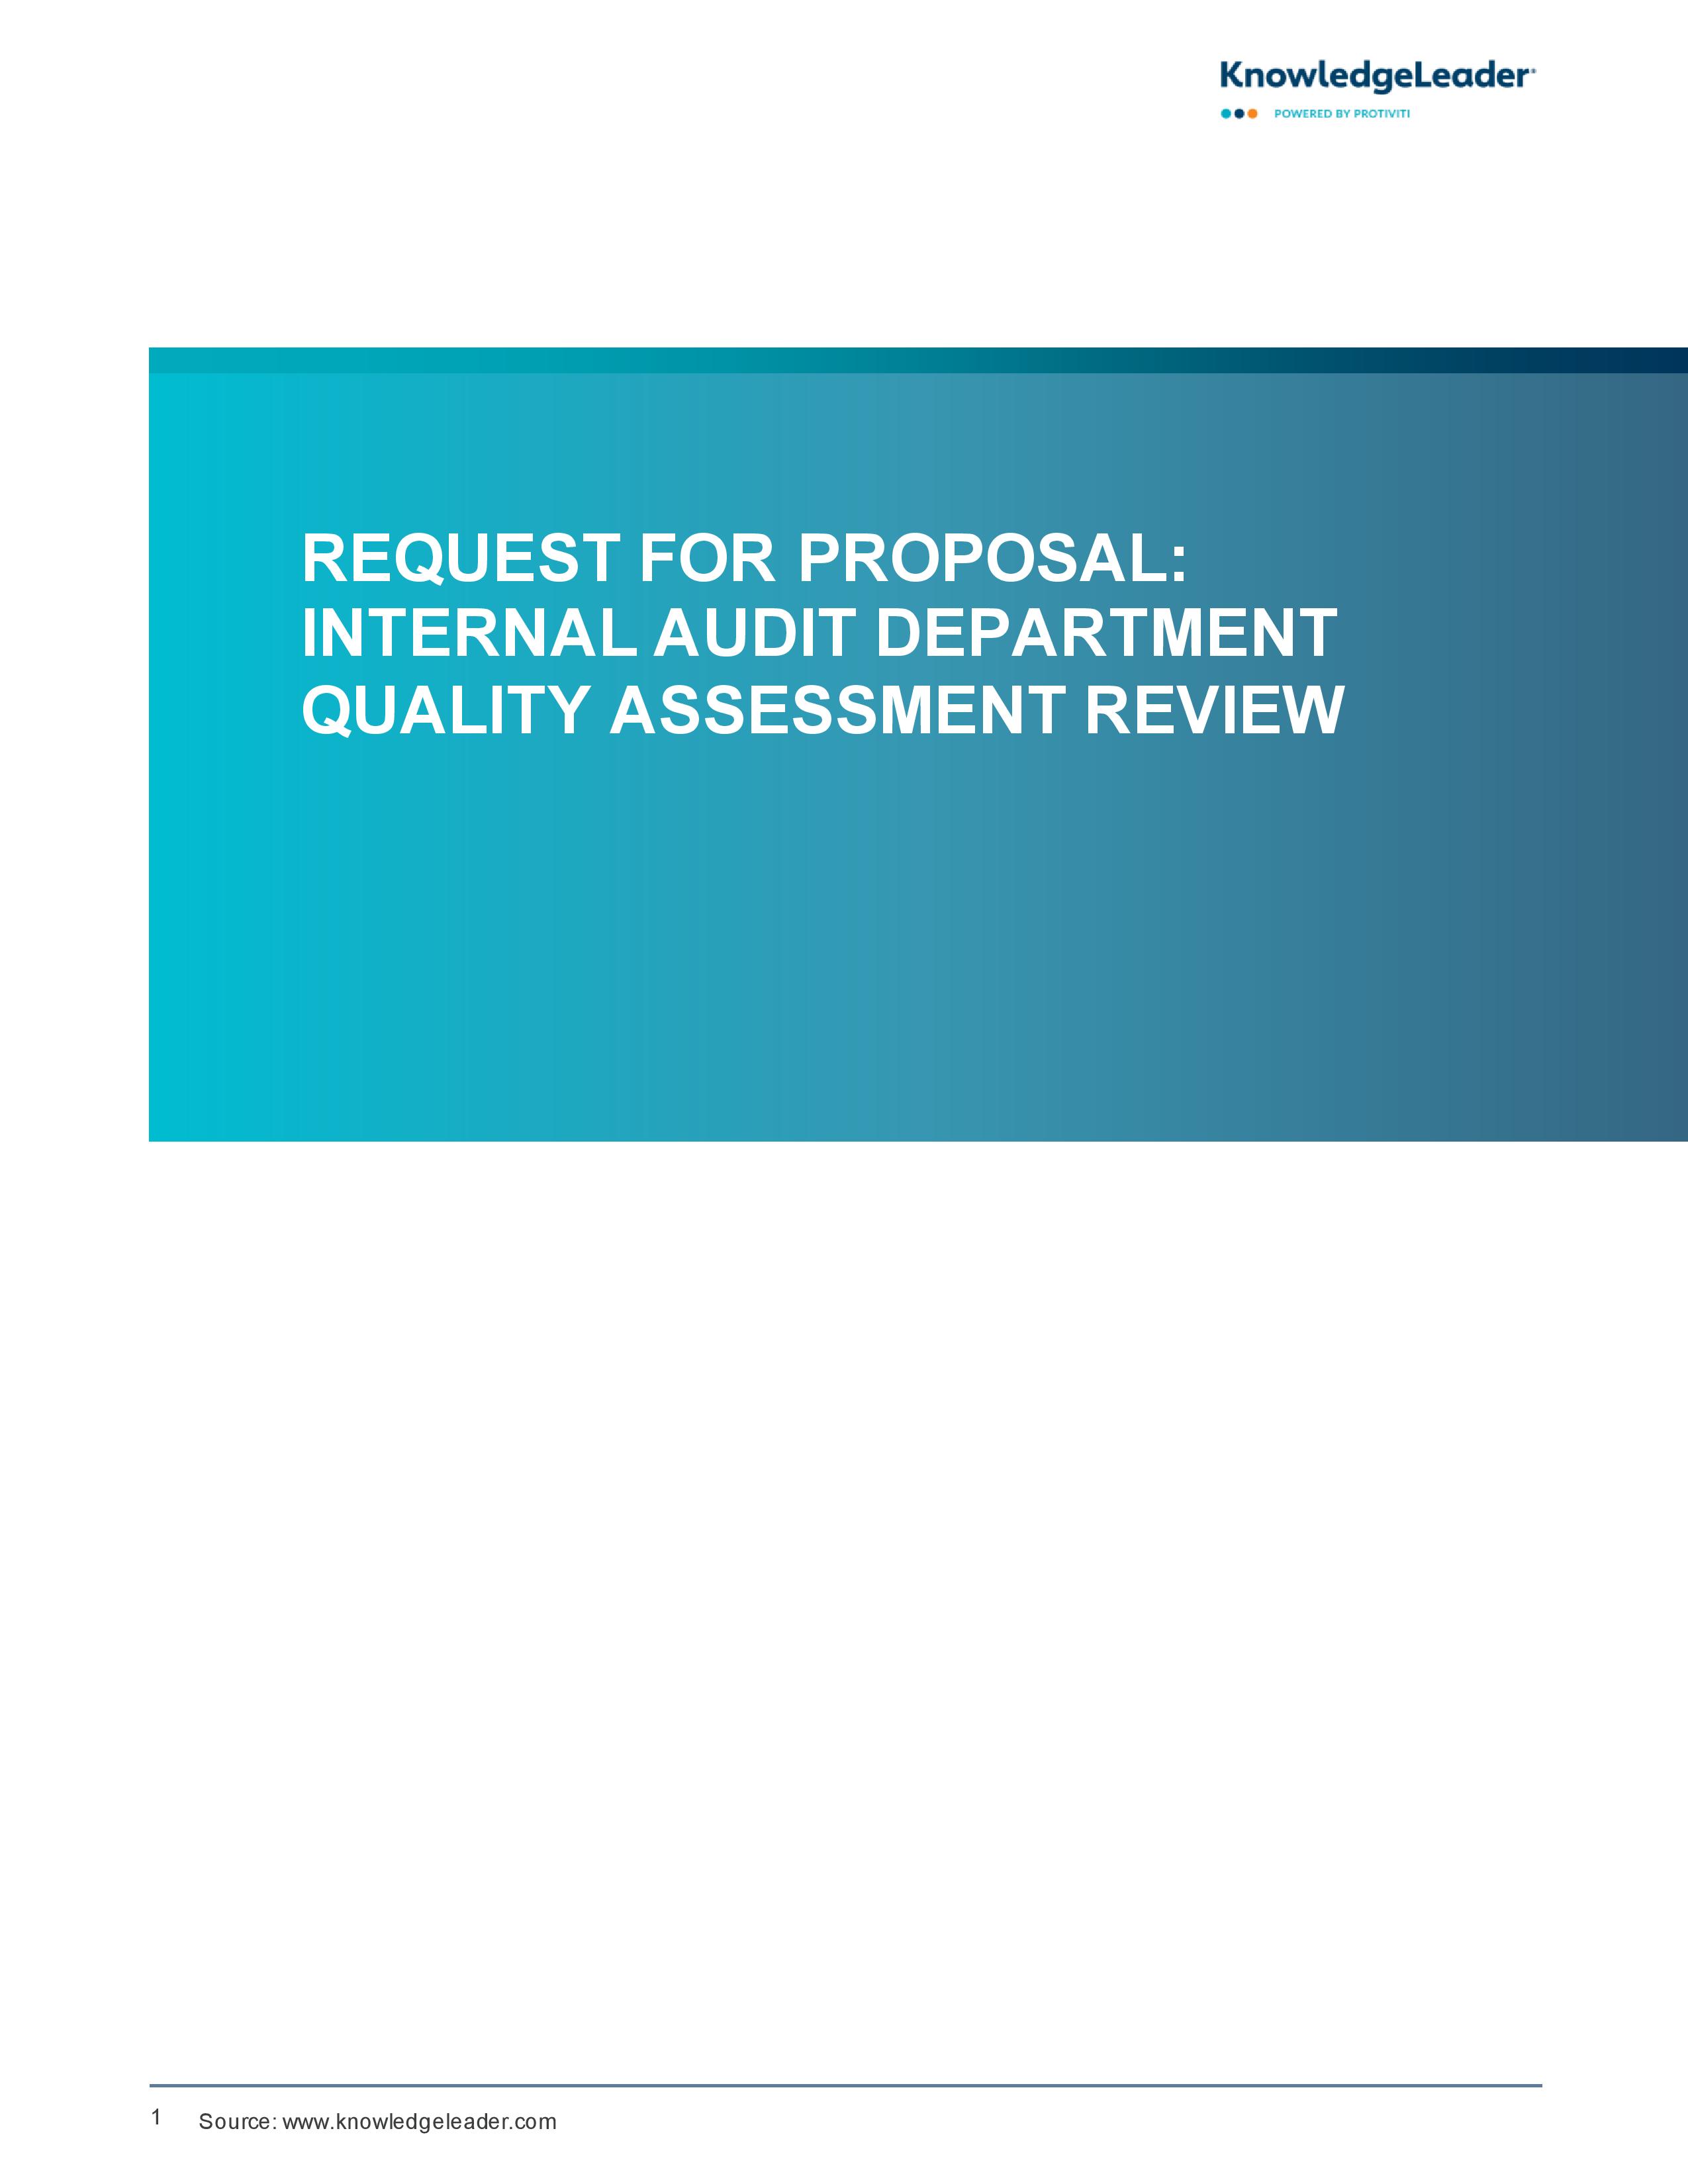 Screenshot of the first page of Request For Proposal - Internal Audit Department Quality Assessment Review